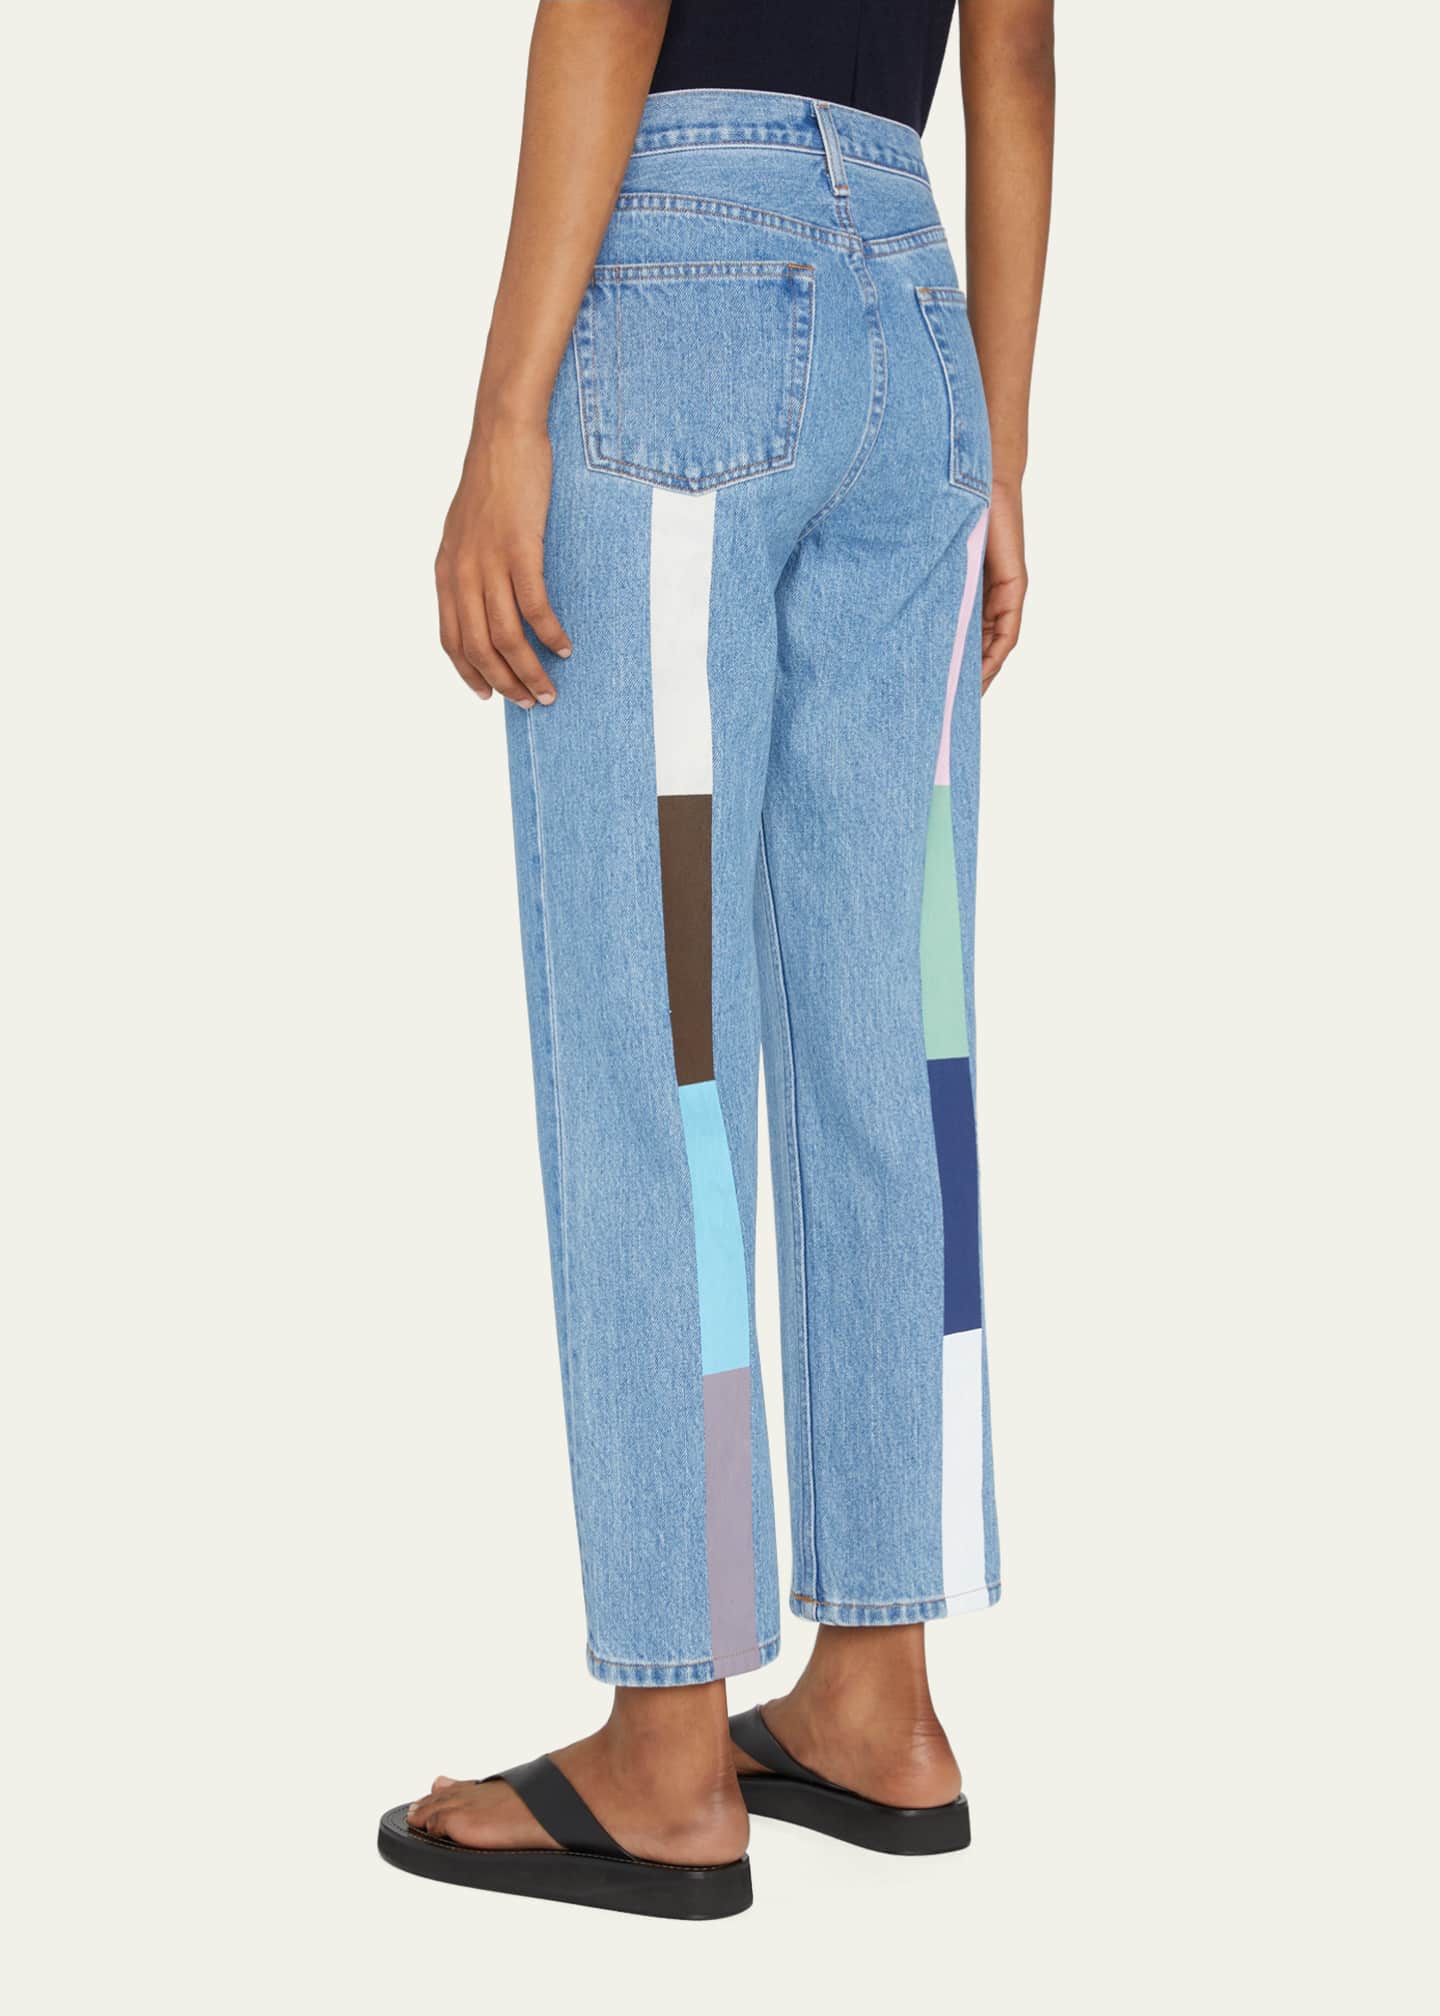 Still Here Pastel Rainbow Tate Crop Jeans Image 3 of 5